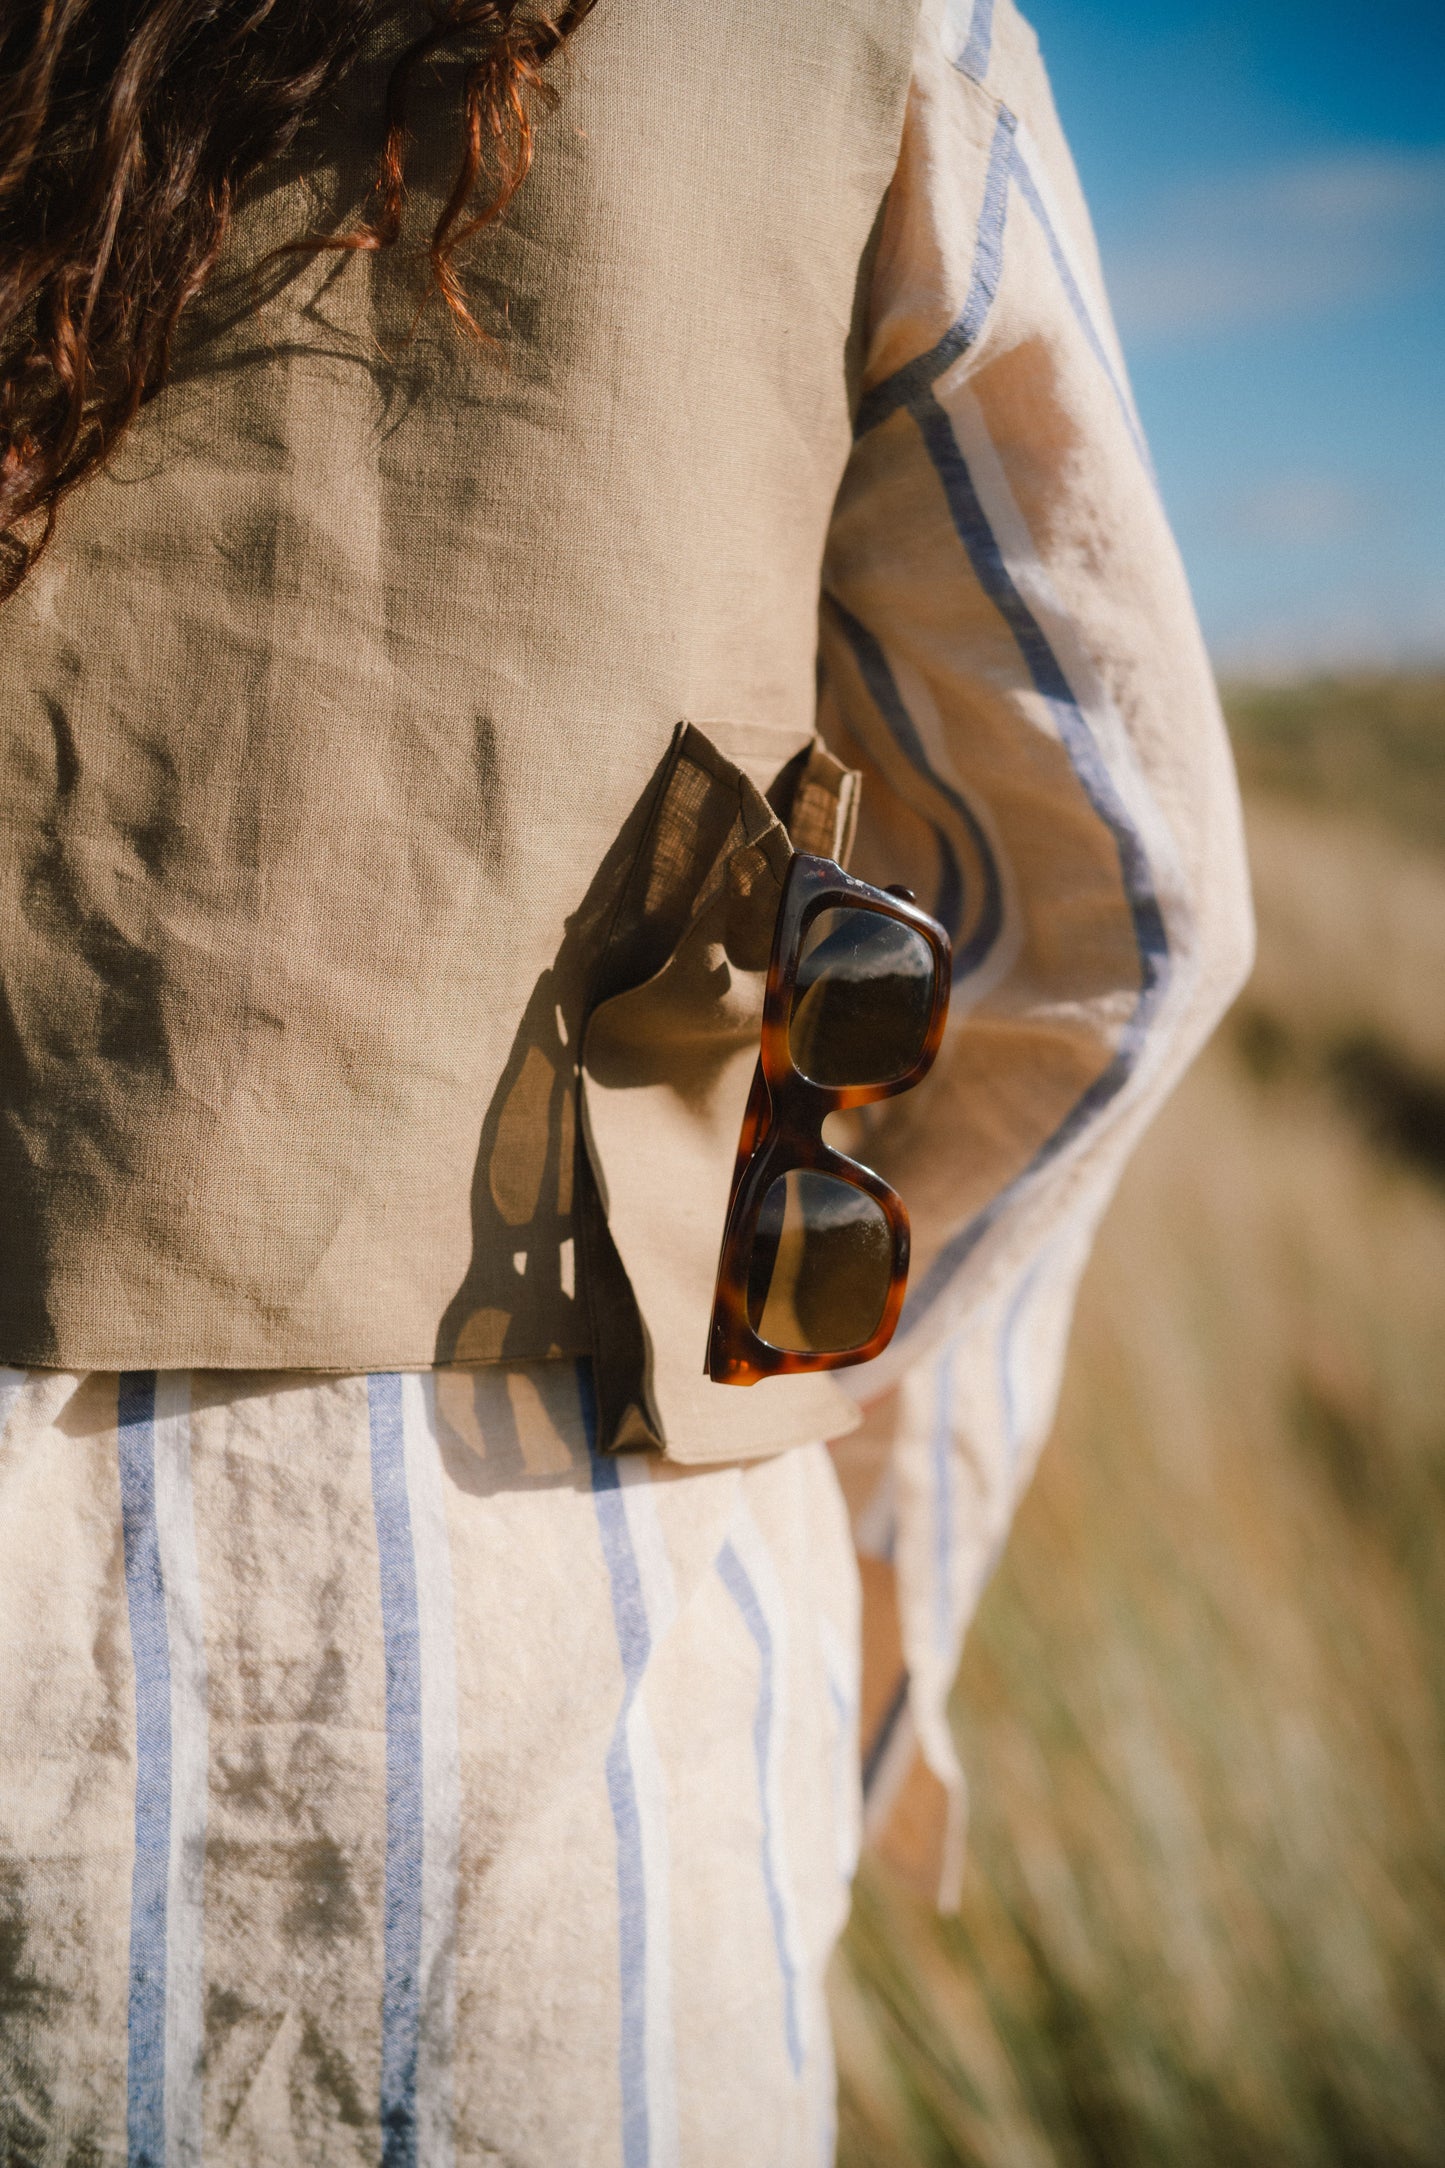 IN THE WILD VEST | A play on a traditional safari jacket, our new ‘In The Wild’ vest is fun worn by itself or as a layering piece for your Spring Summer wardrobe. A simple shape with tie closure detail, three cargo style pockets and bow detail on shoulder